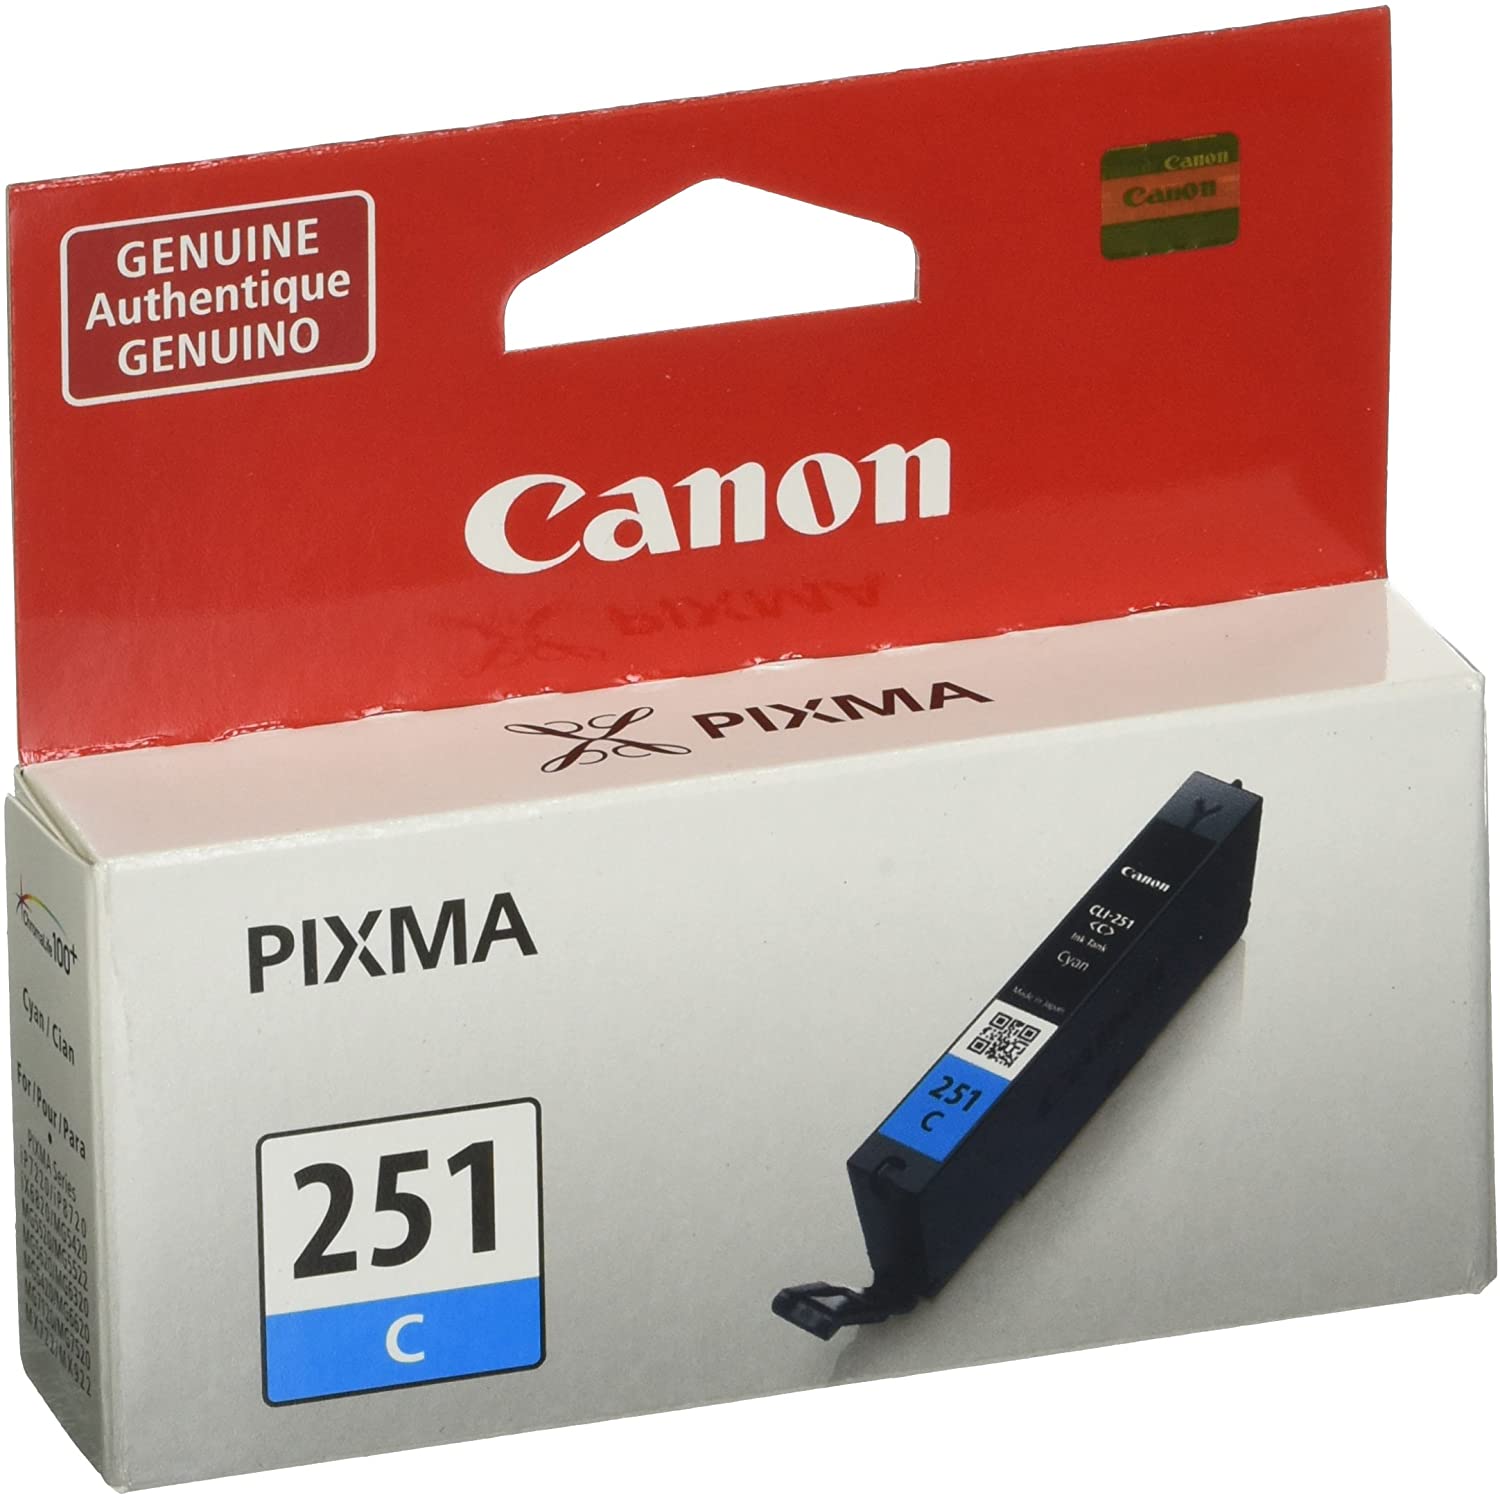 Canon CLI-251 Cyan Ink Tank Compatible to MG6320 , IP7220 & MG5420, MX